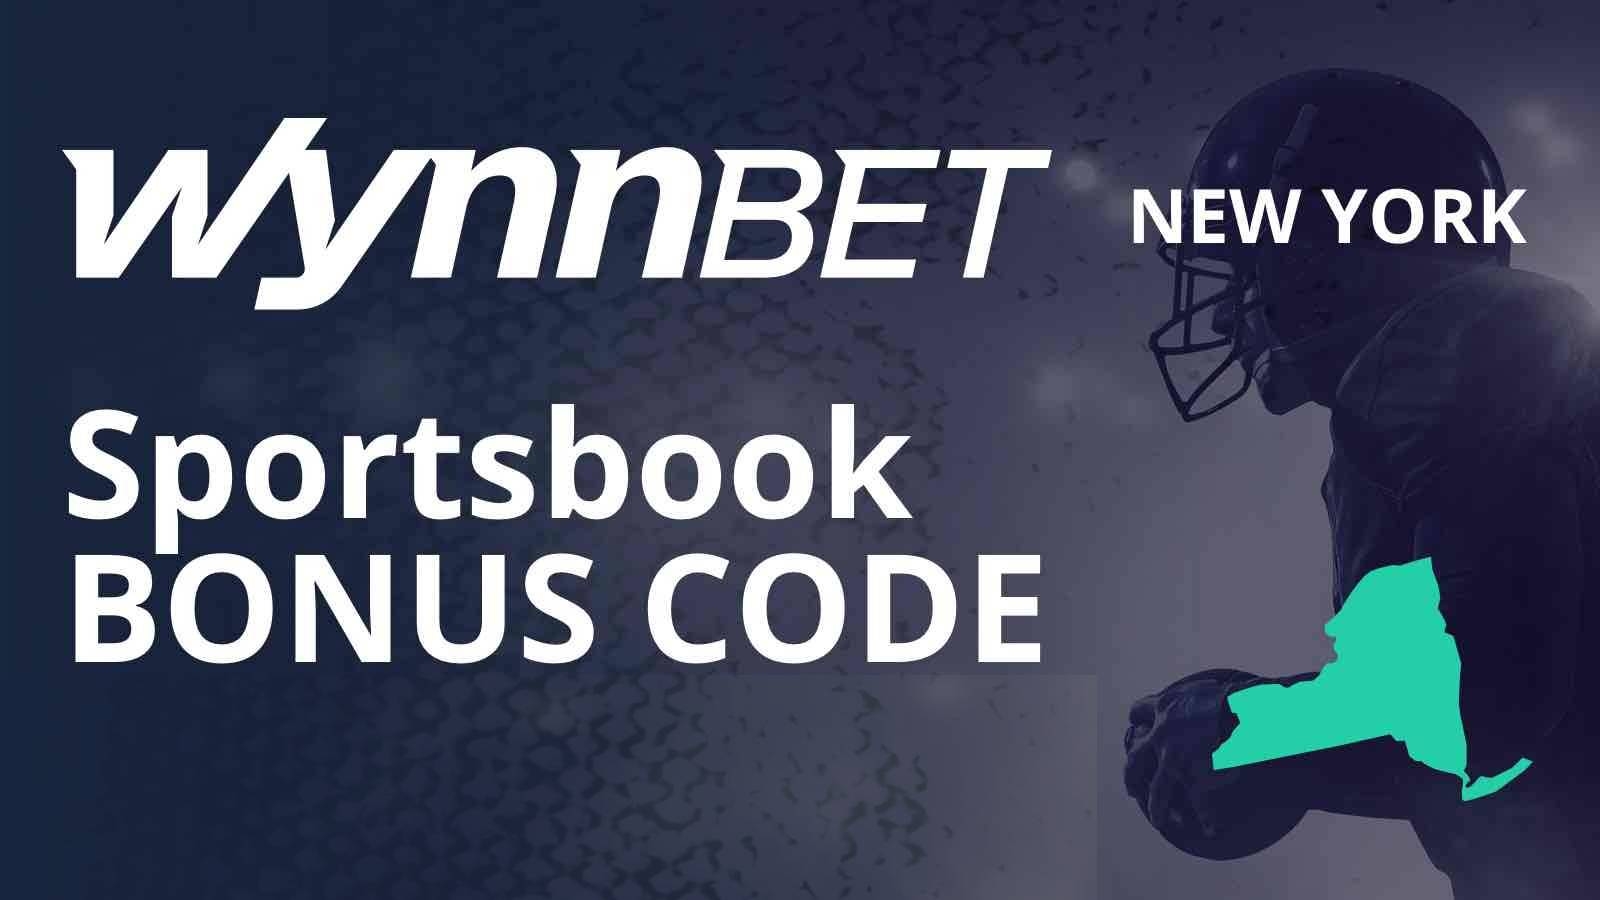 WynnBET NY Promo Code XRGM Cashes In With Fantastic Bet $20, Get $200 Deal